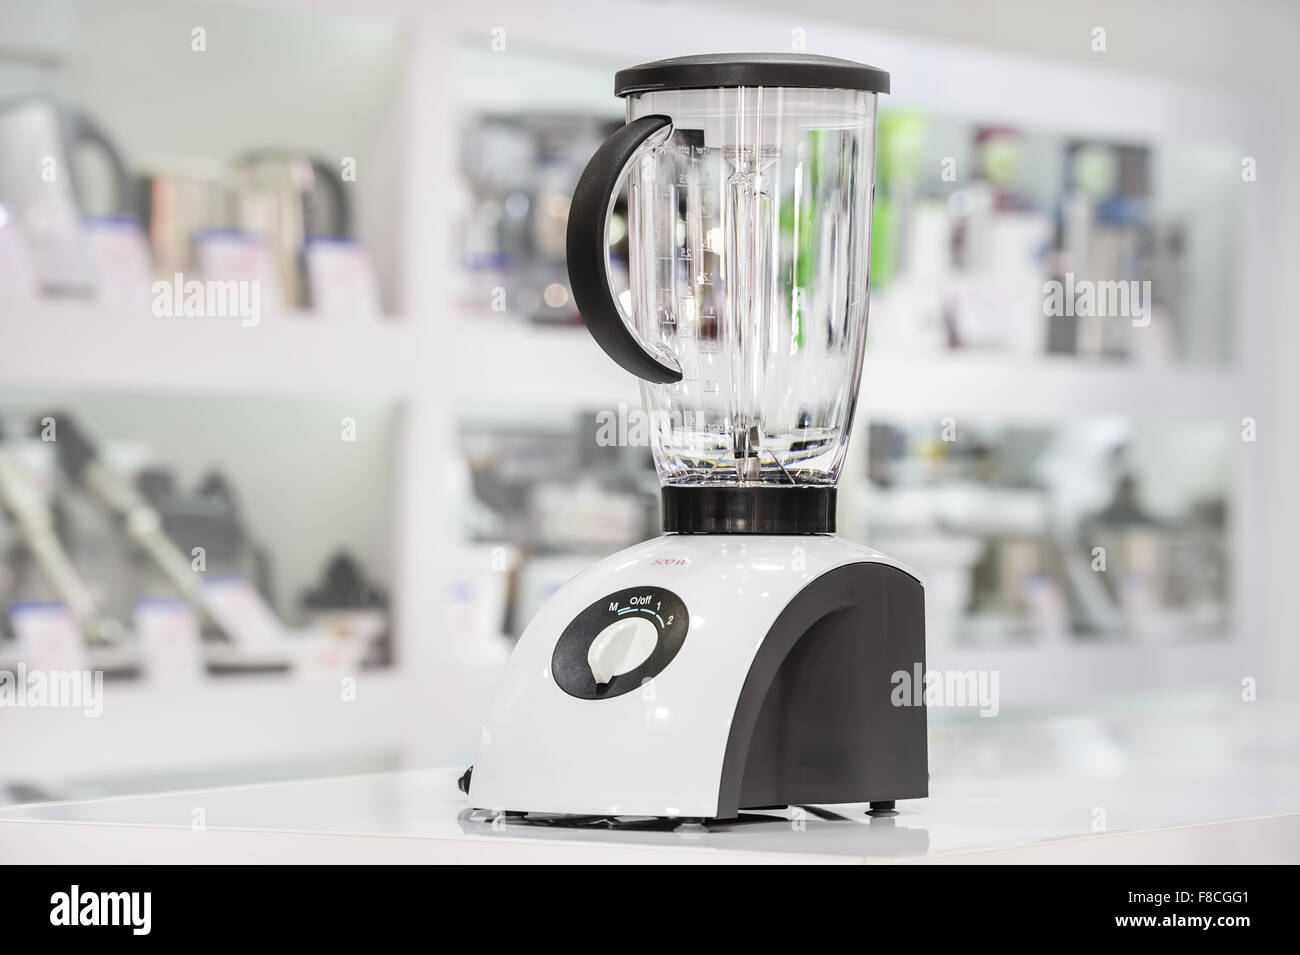 single electric blender in retail store Stock Photo